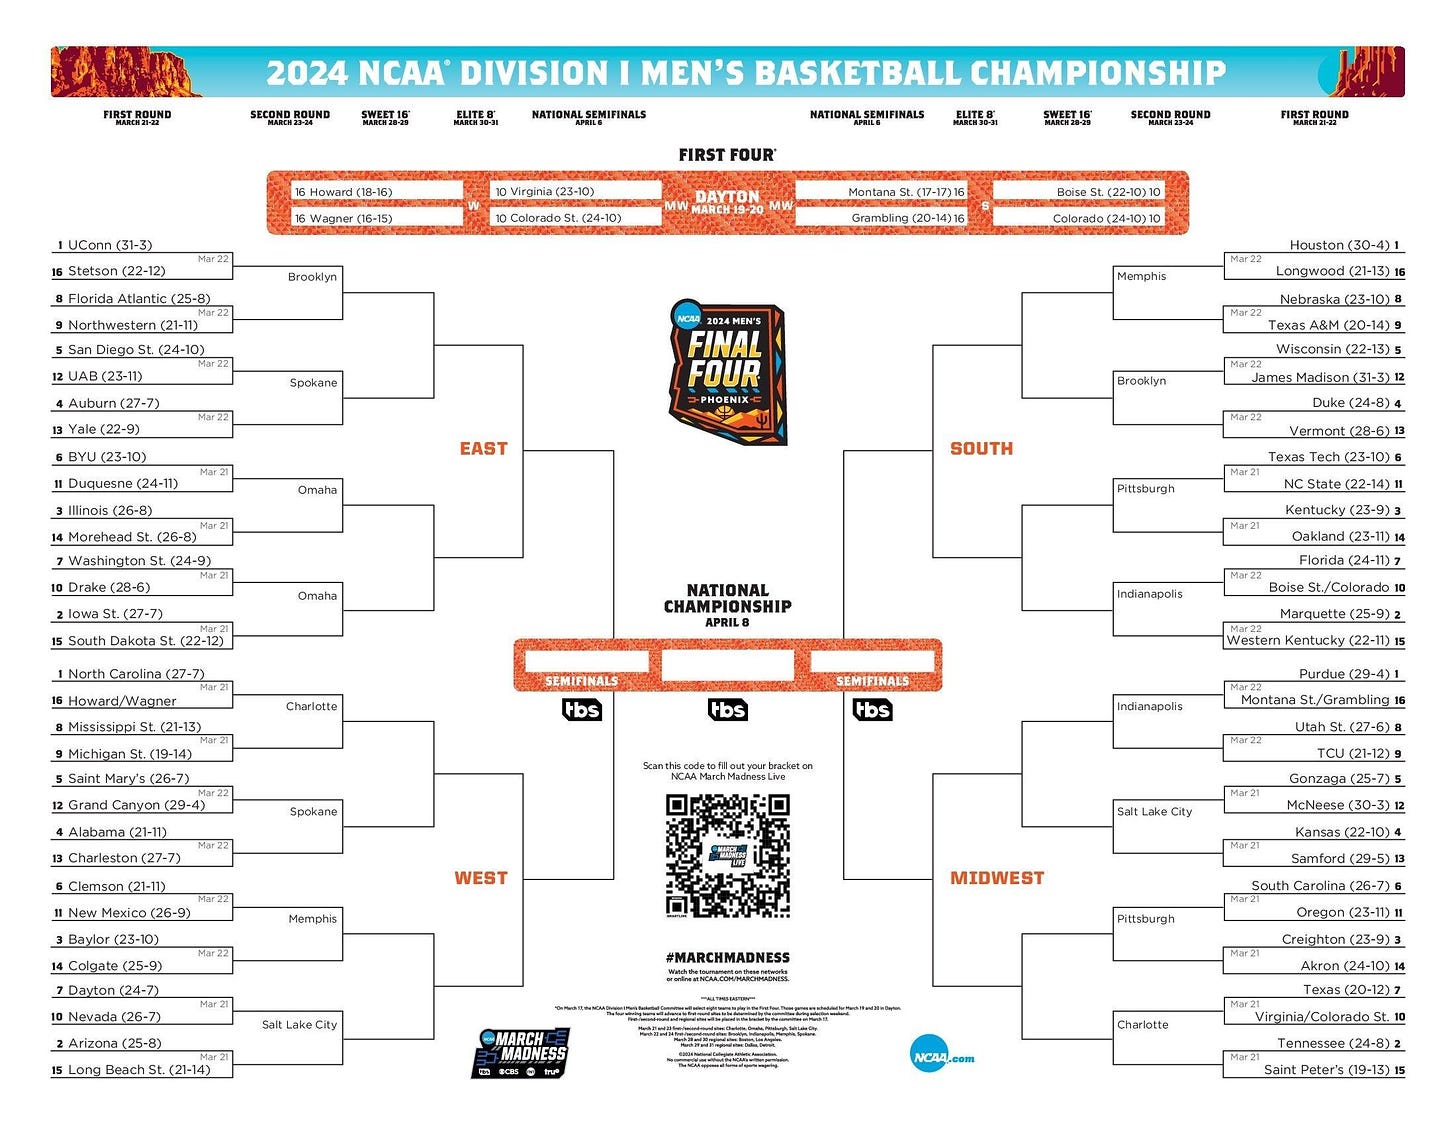 Here is the 2024 NCAA tournament bracket for March Madness